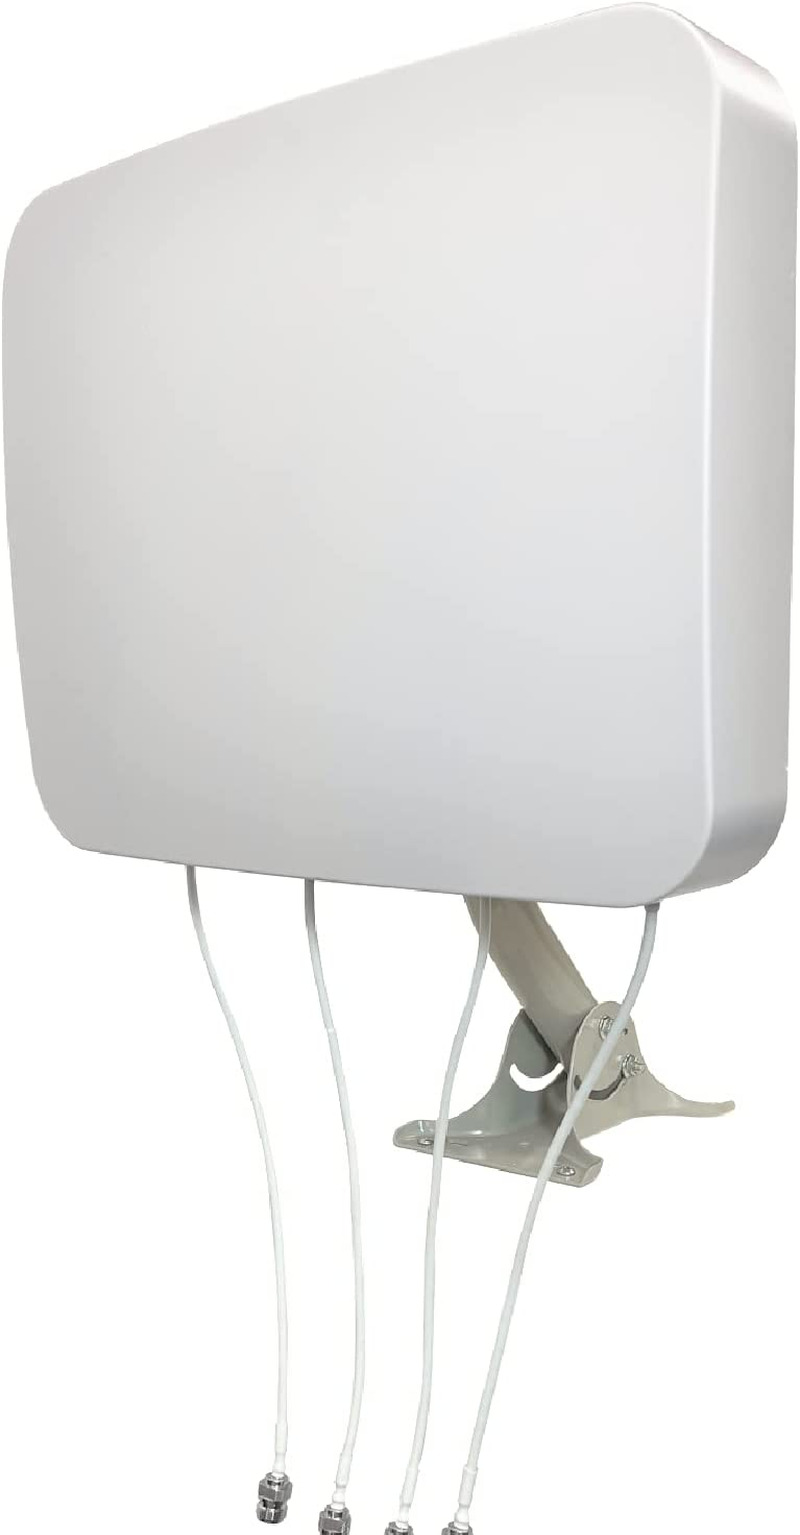 MIMO 4X4 Panel External Antenna for 4G LTE/5G Hotspots & Routers (Antenna Only)